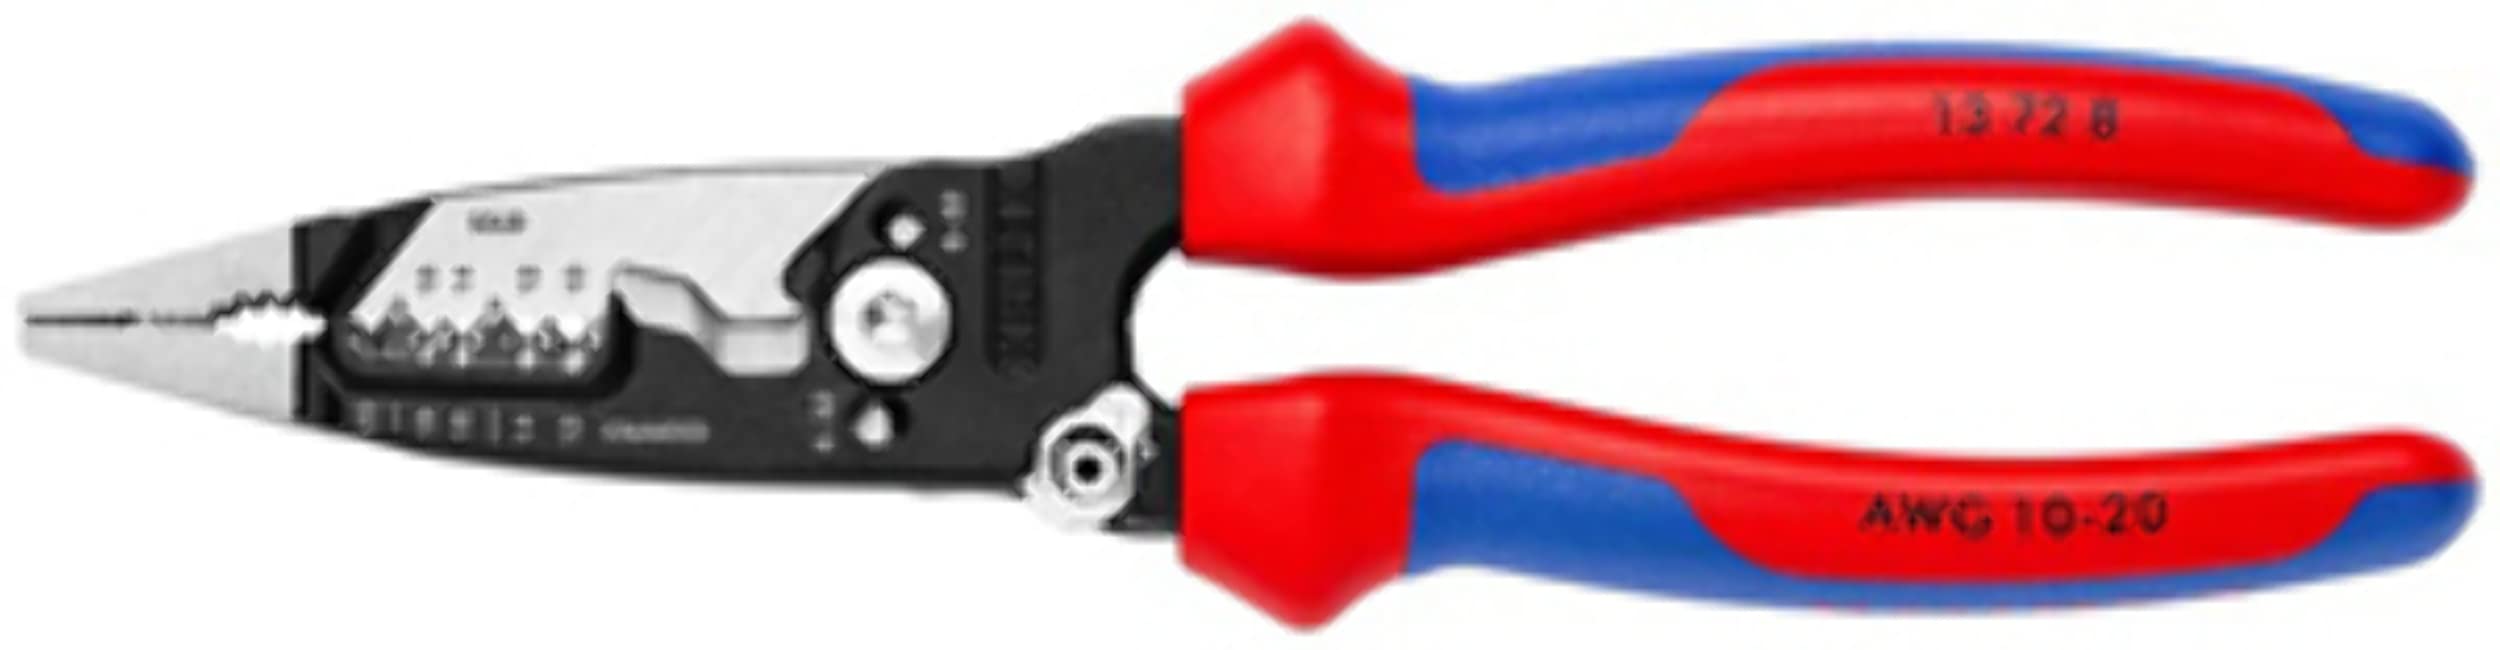 KNIPEX Forged Wire Stripper 10-20 AWG